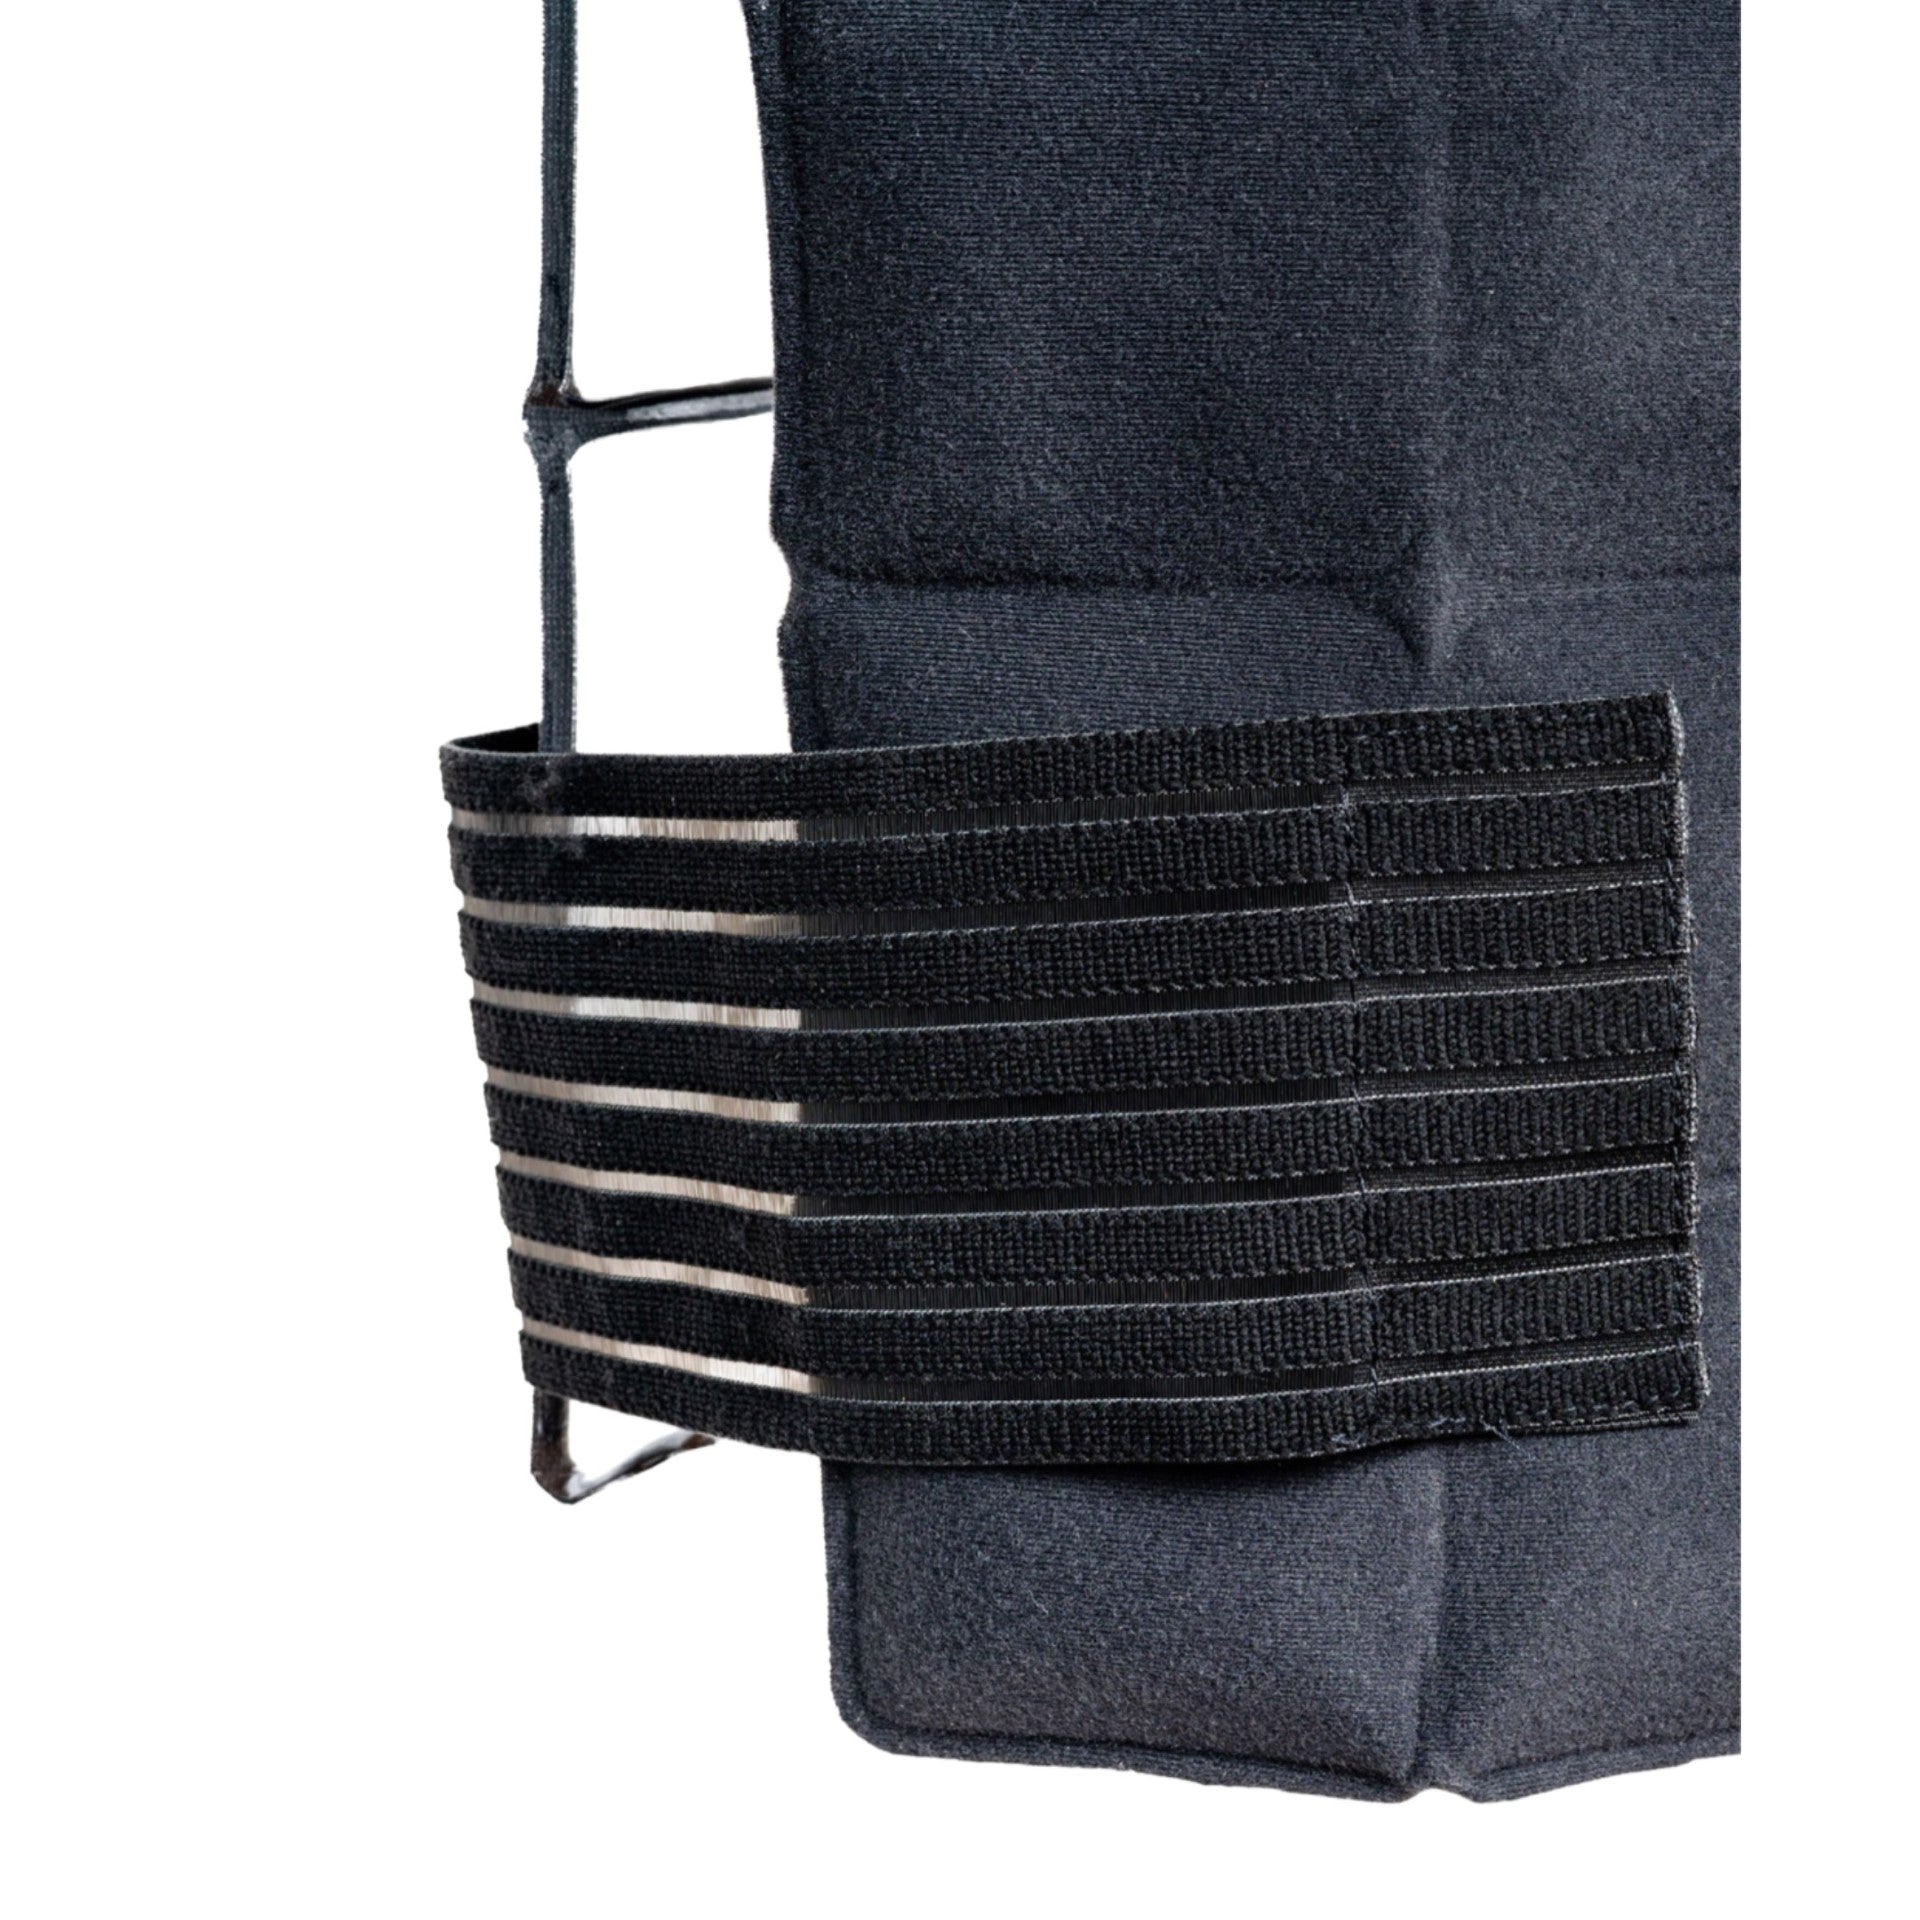 Concealable Vest Strap Photo ice pack